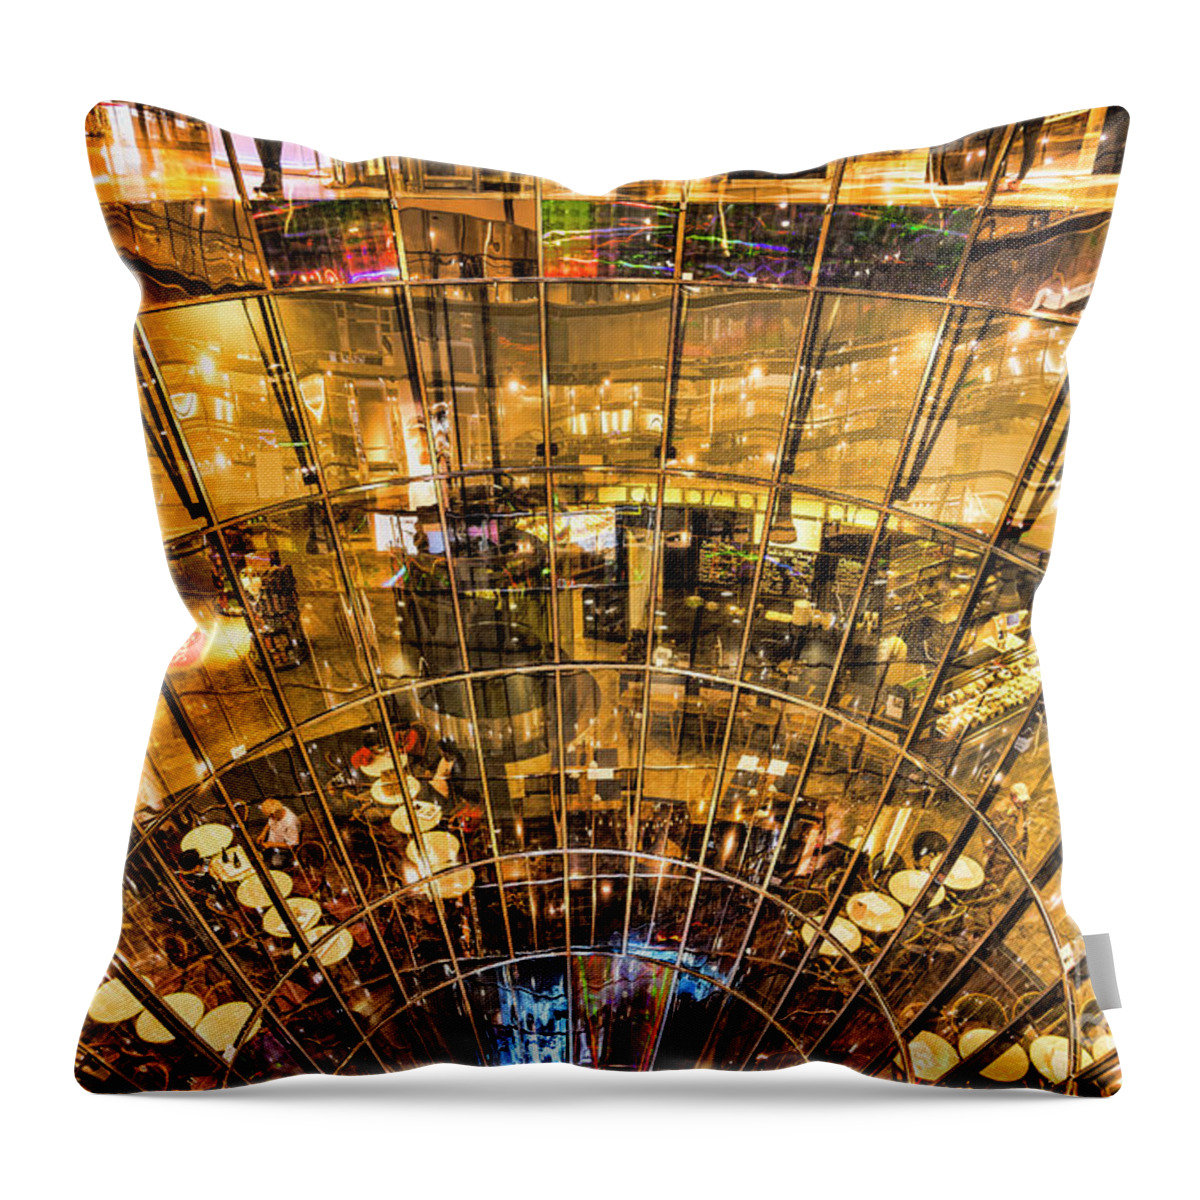 Amazing Throw Pillow featuring the photograph Entrancement by Brenda Kean